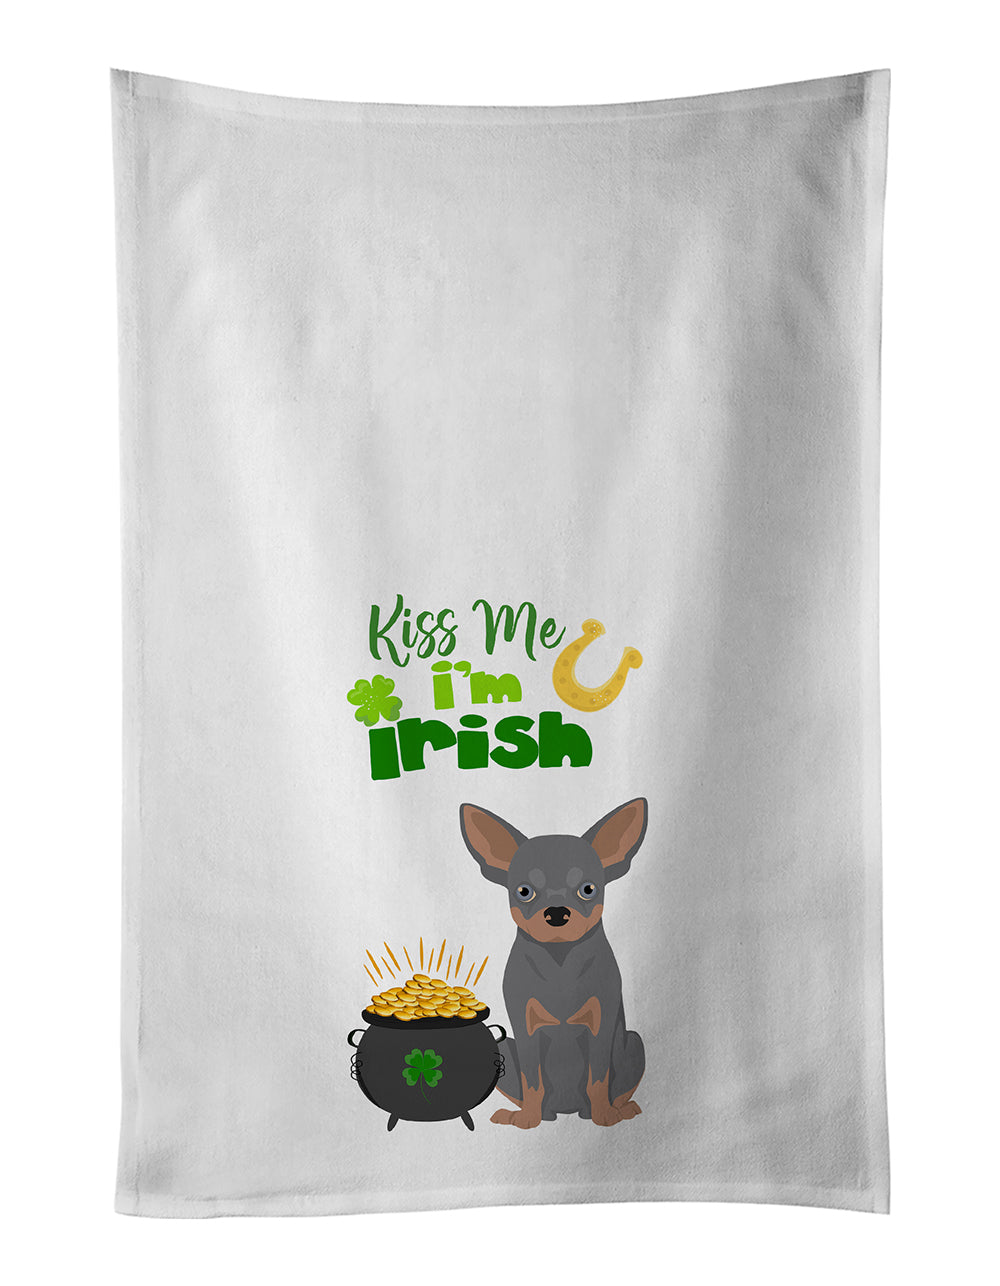 Buy this Blue and Tan Chihuahua St. Patrick's Day White Kitchen Towel Set of 2 Dish Towels